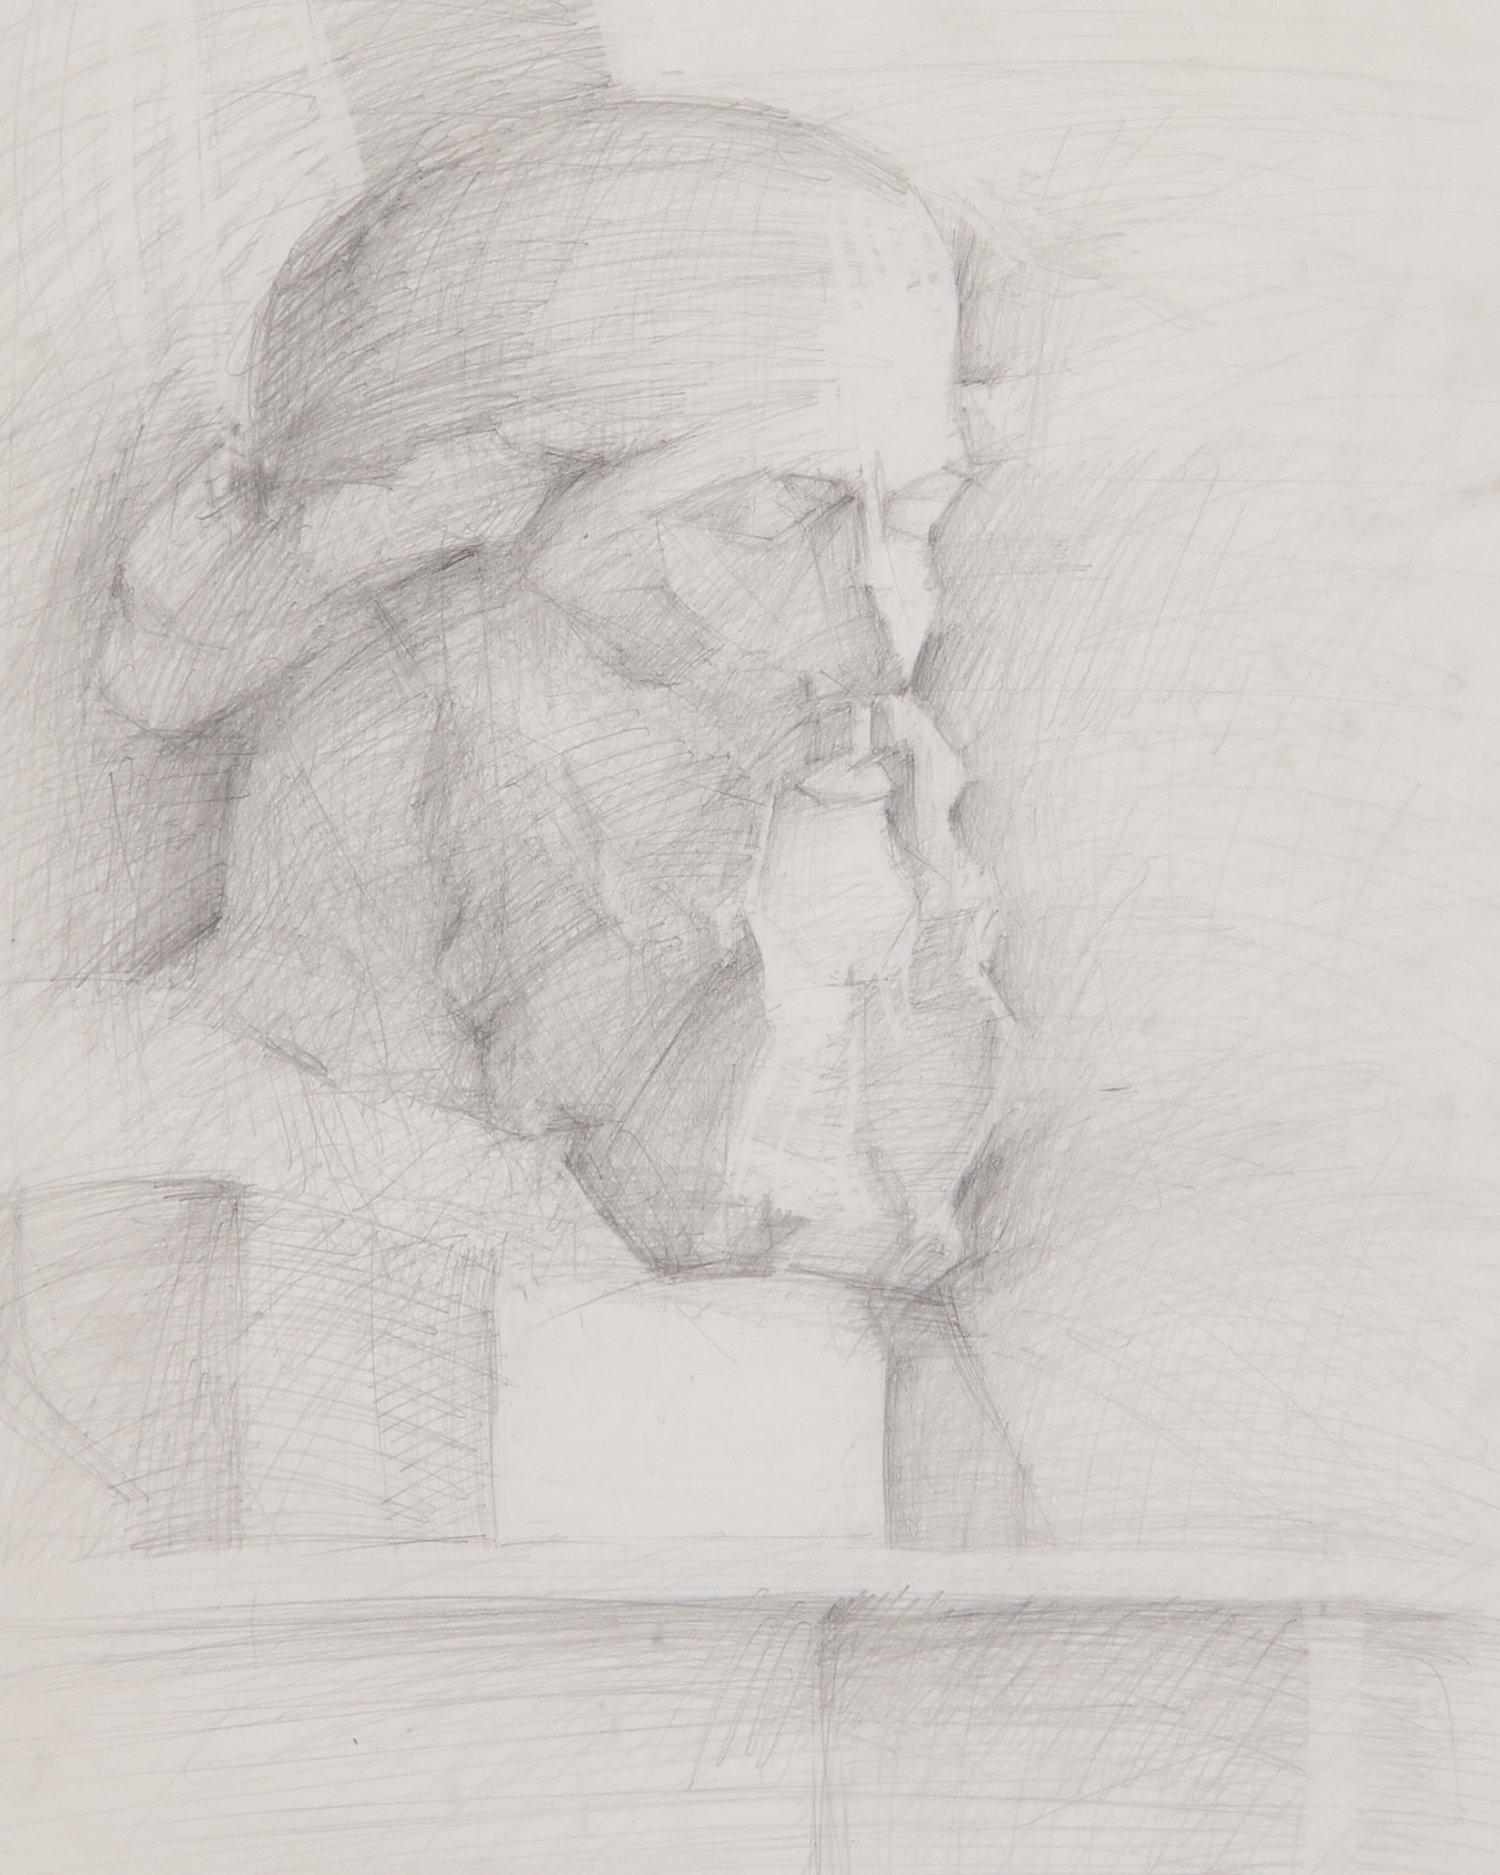 While in Athens, Greece we came across an artist portfolio bursting at the seams with thoughtful pencil sketches. We imagine this artist spent much time in the museums of Athens, perfecting his techniques. This is one in a series of 10. 

We’ve